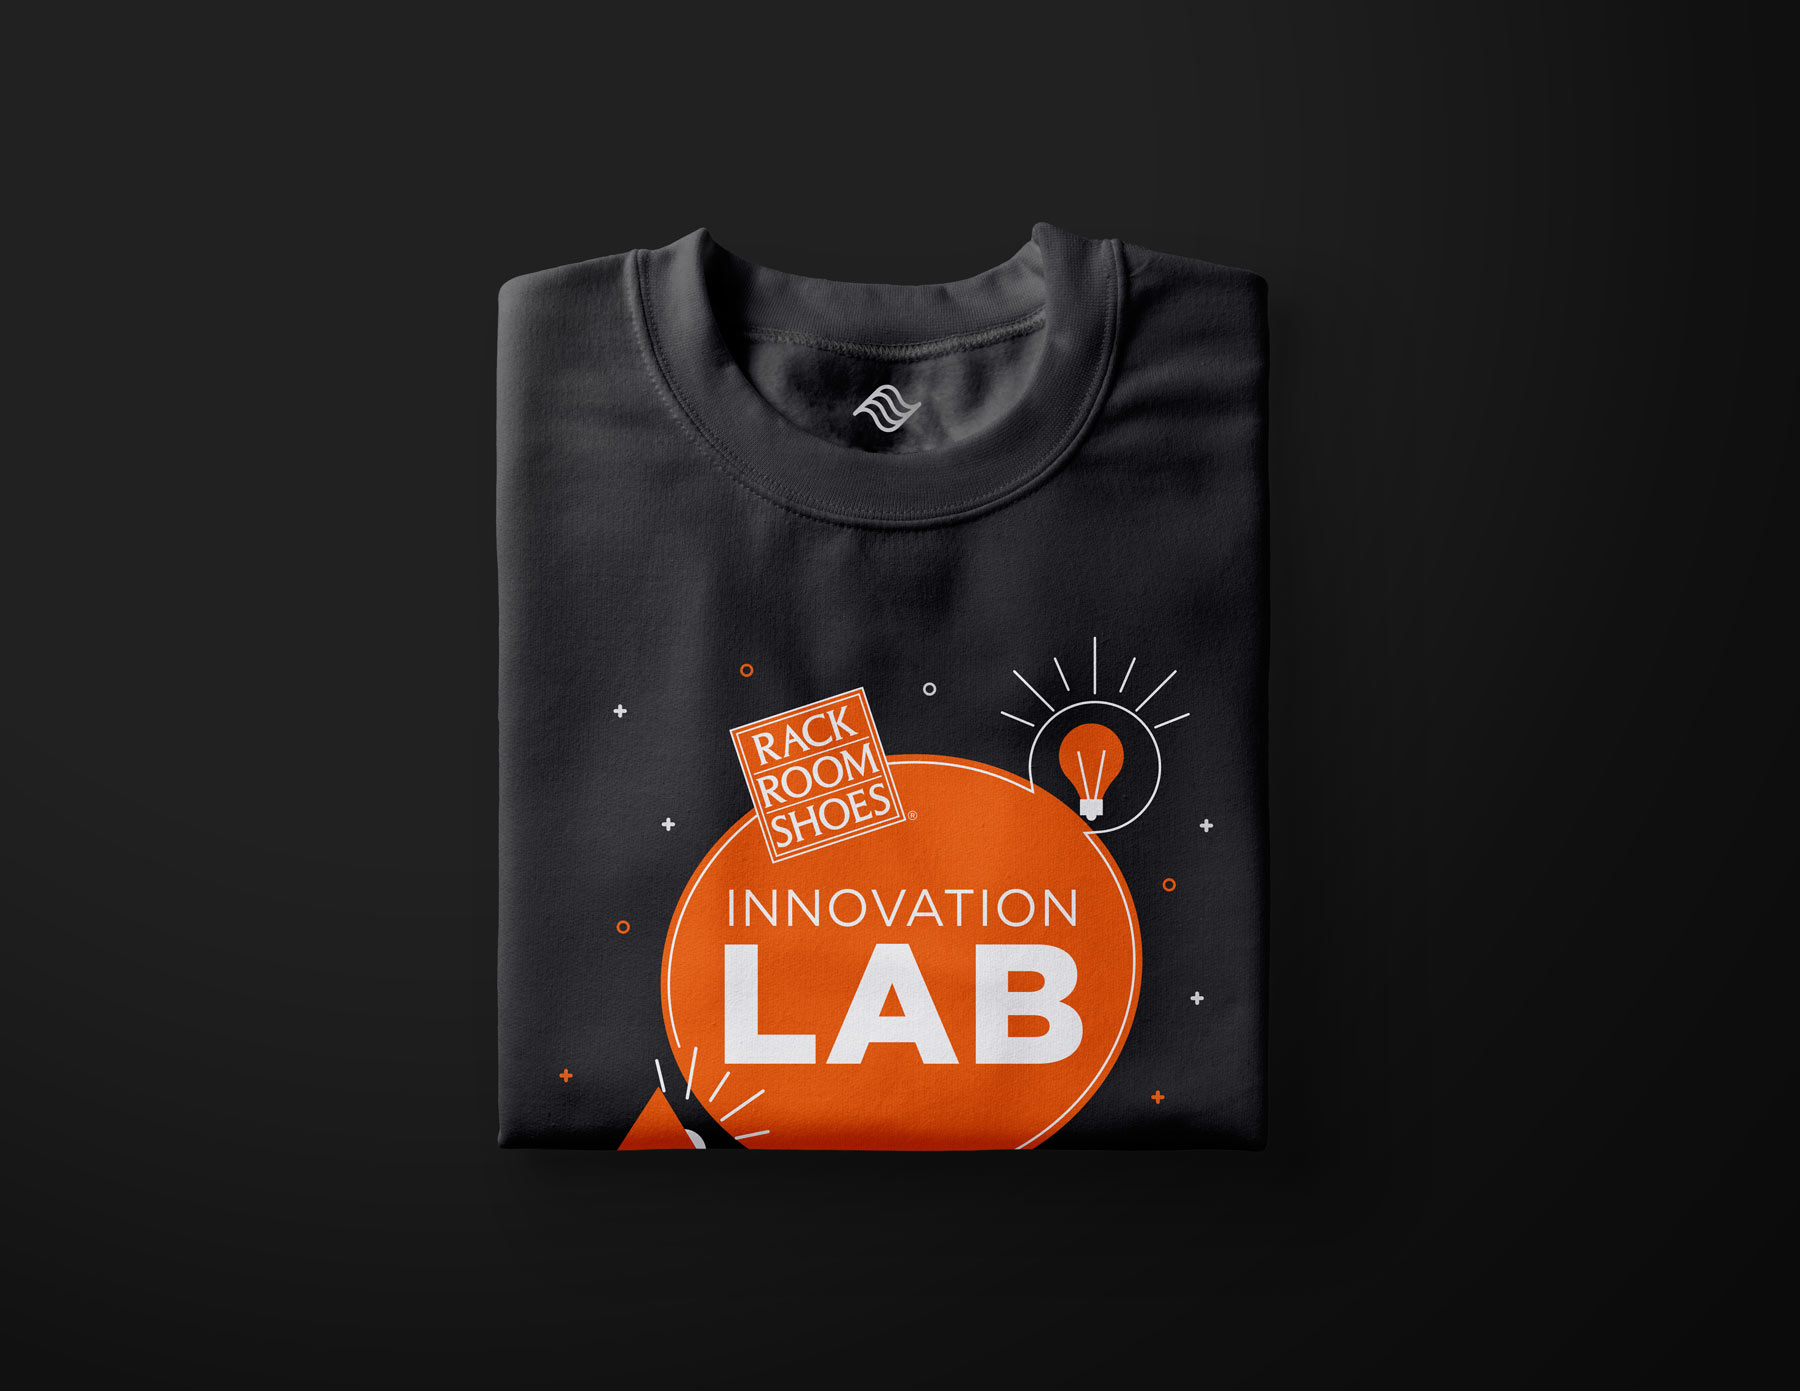 black t-shirt with the innovation lab logo on it posted on a black background